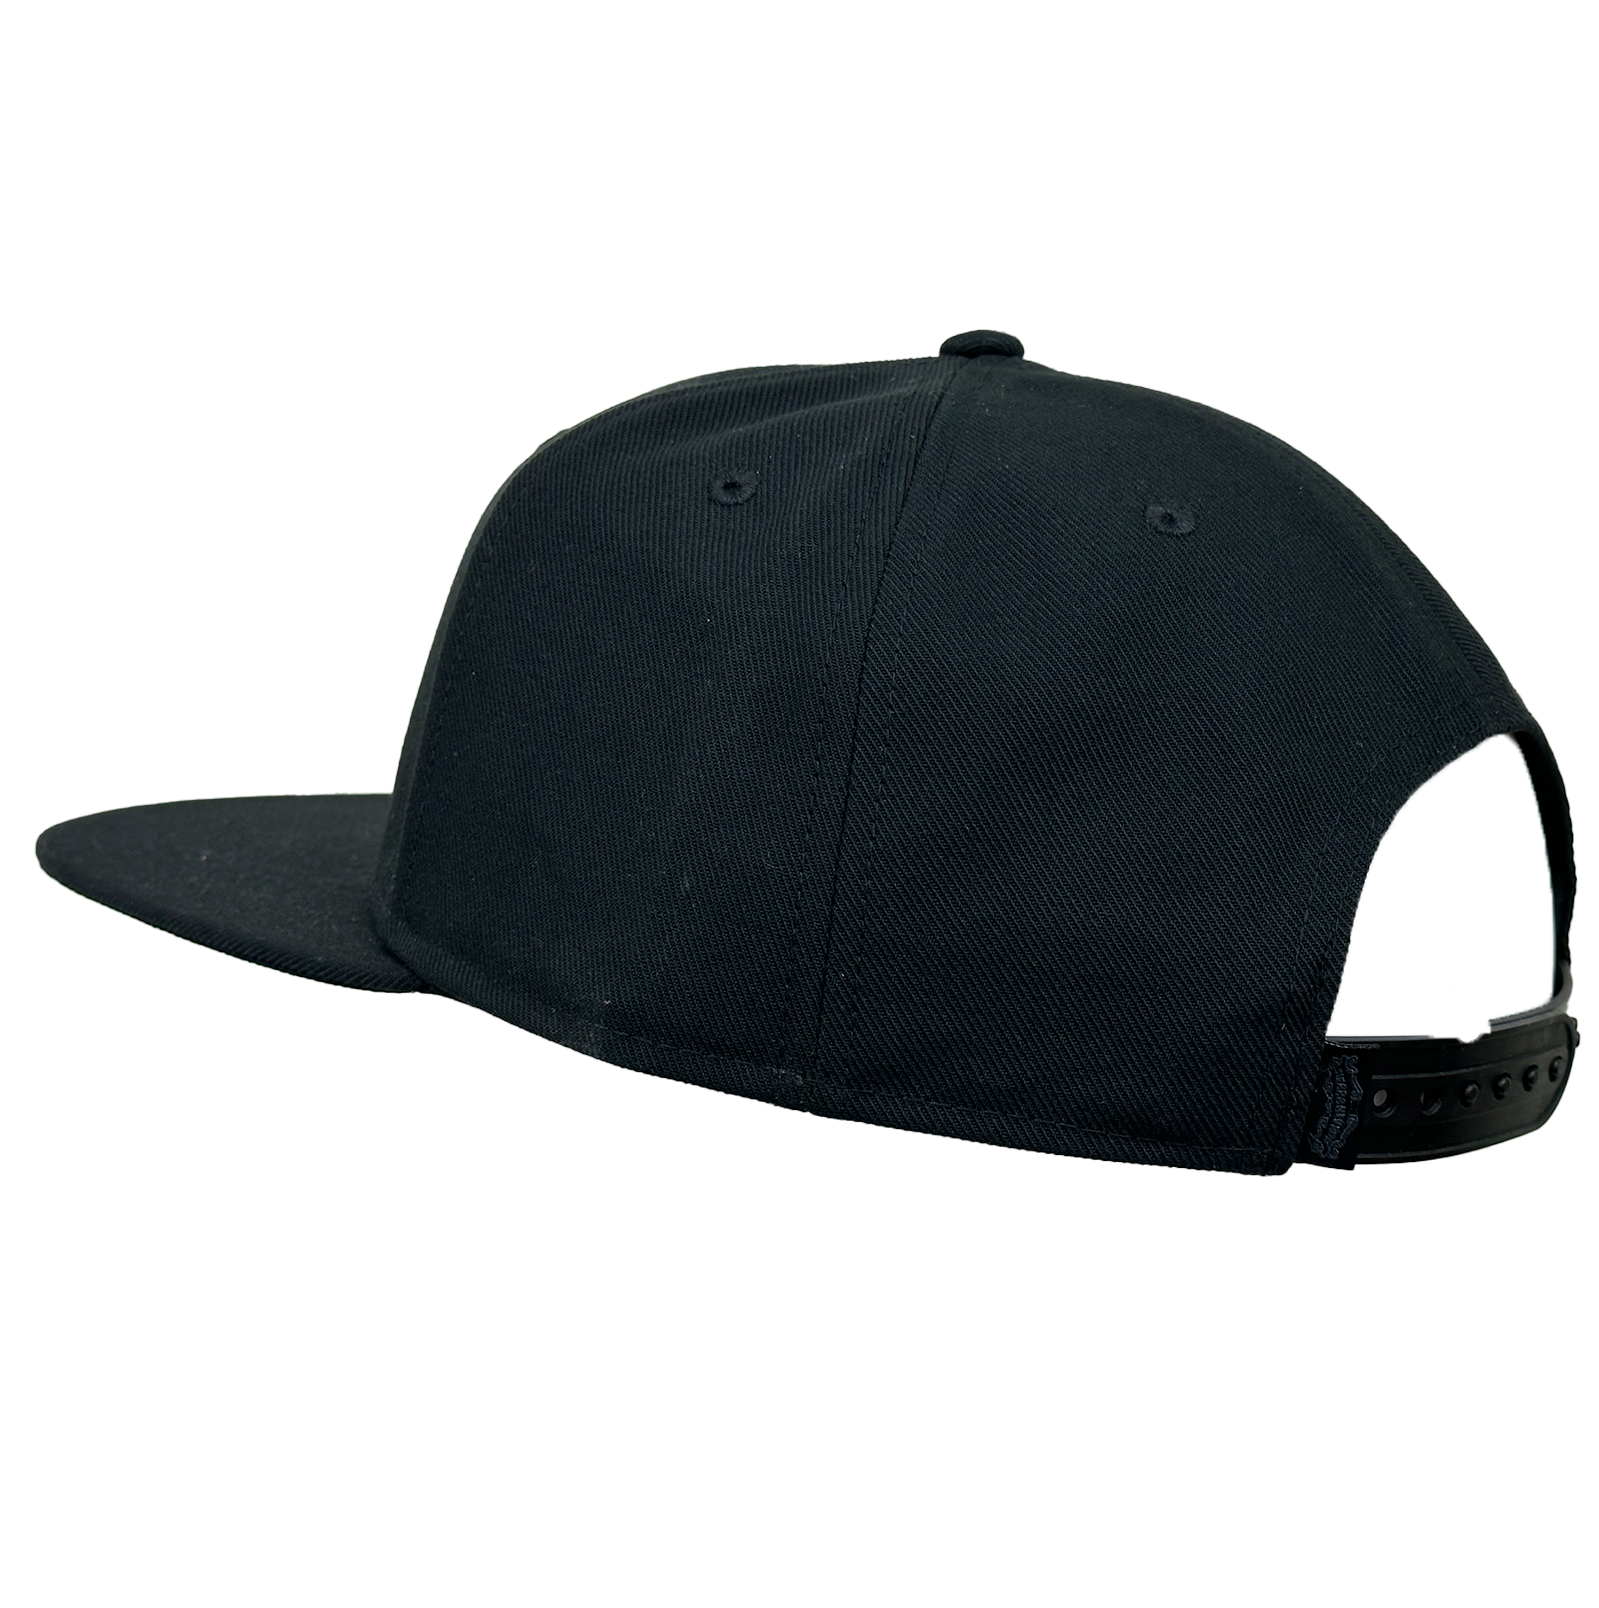 Sierra Nevada Stacked Text Hat Black - back view showing the snapback closure